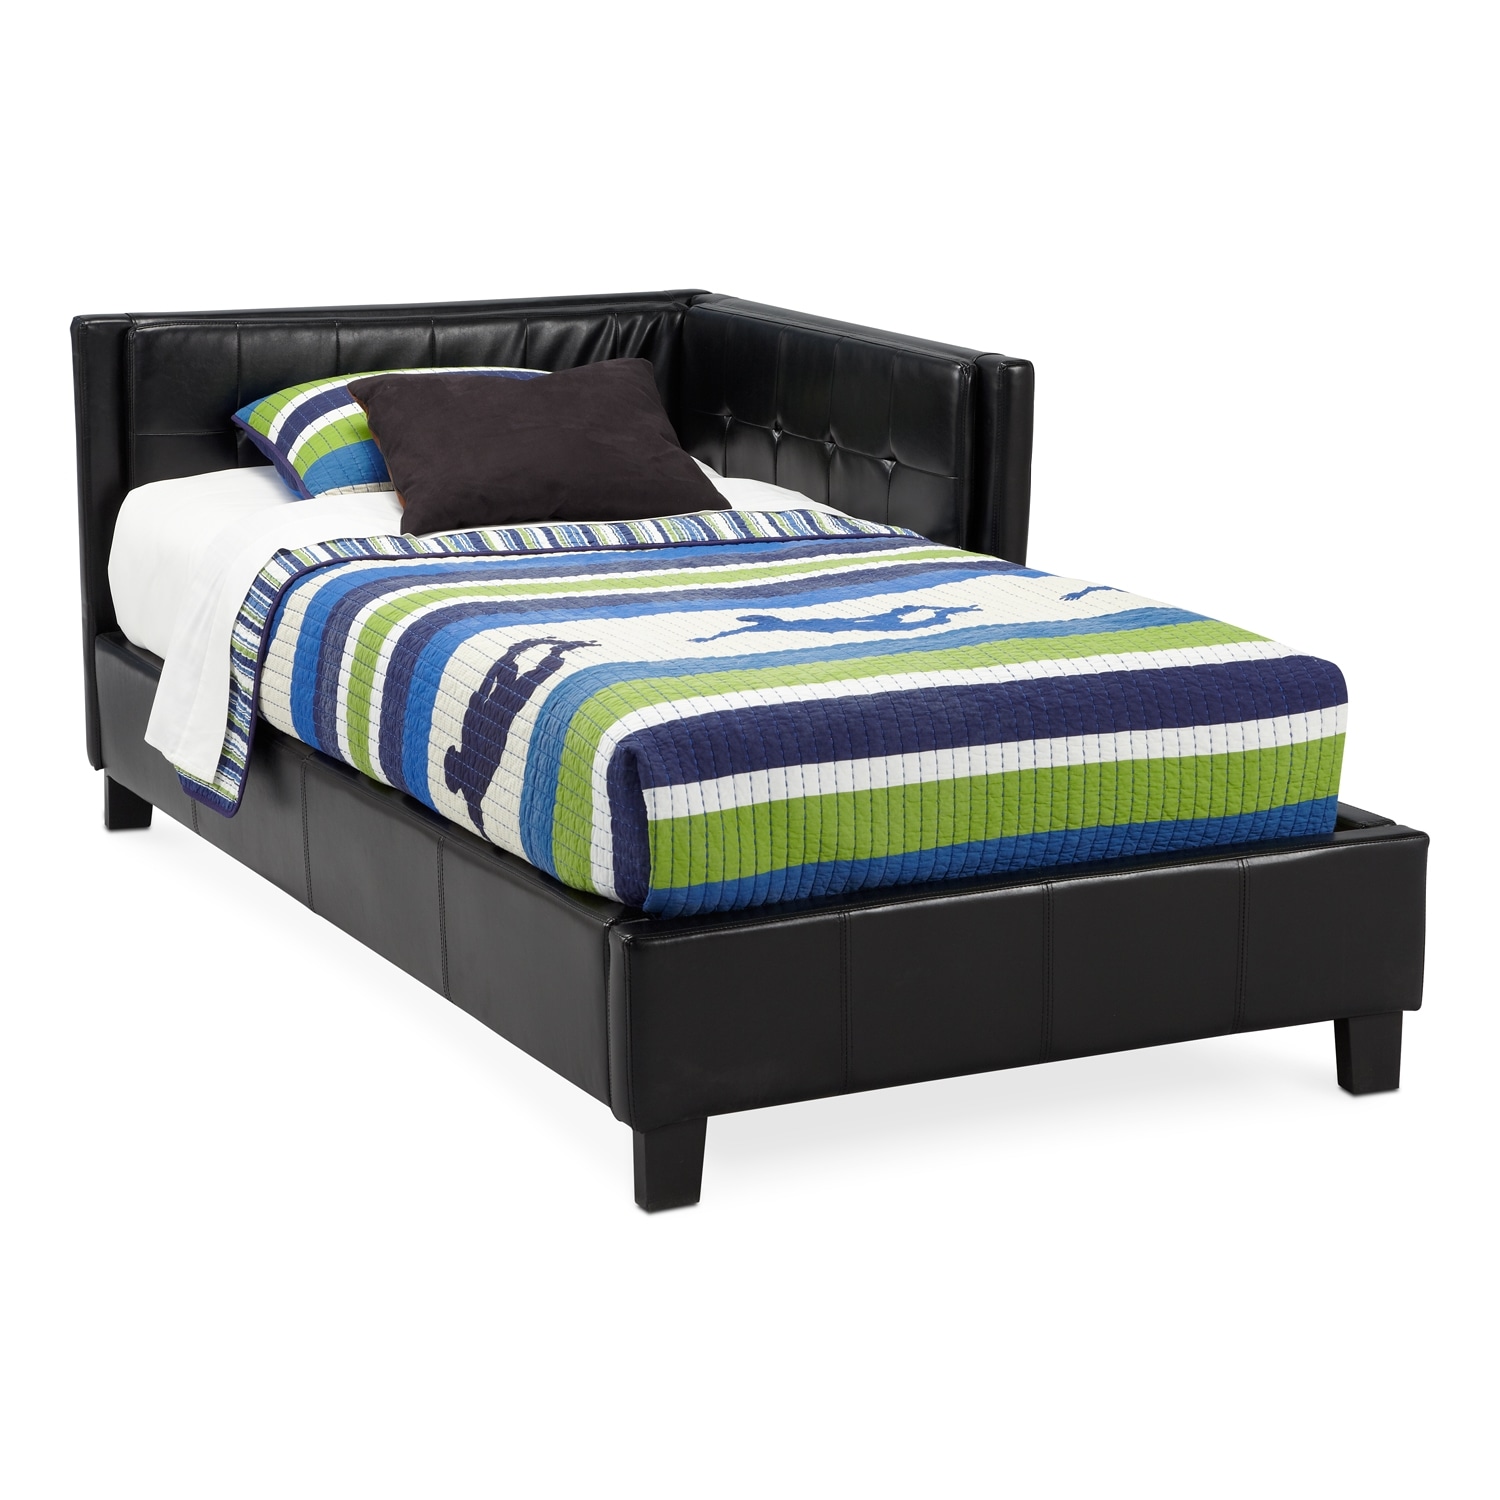 black twin beds for kids photo - 4